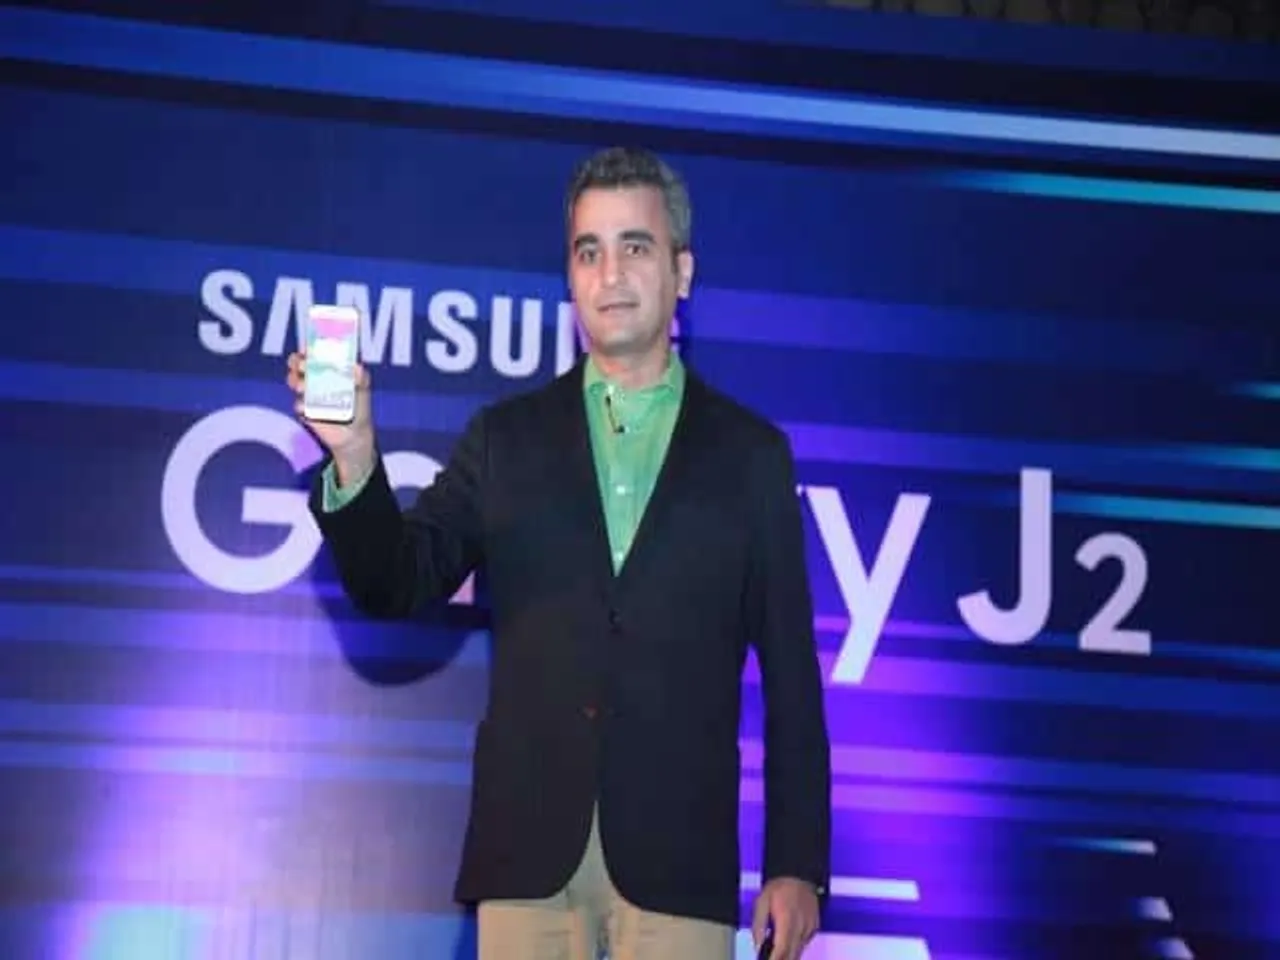 Samsung Galaxy J2, the entry level 4G smartphone launched